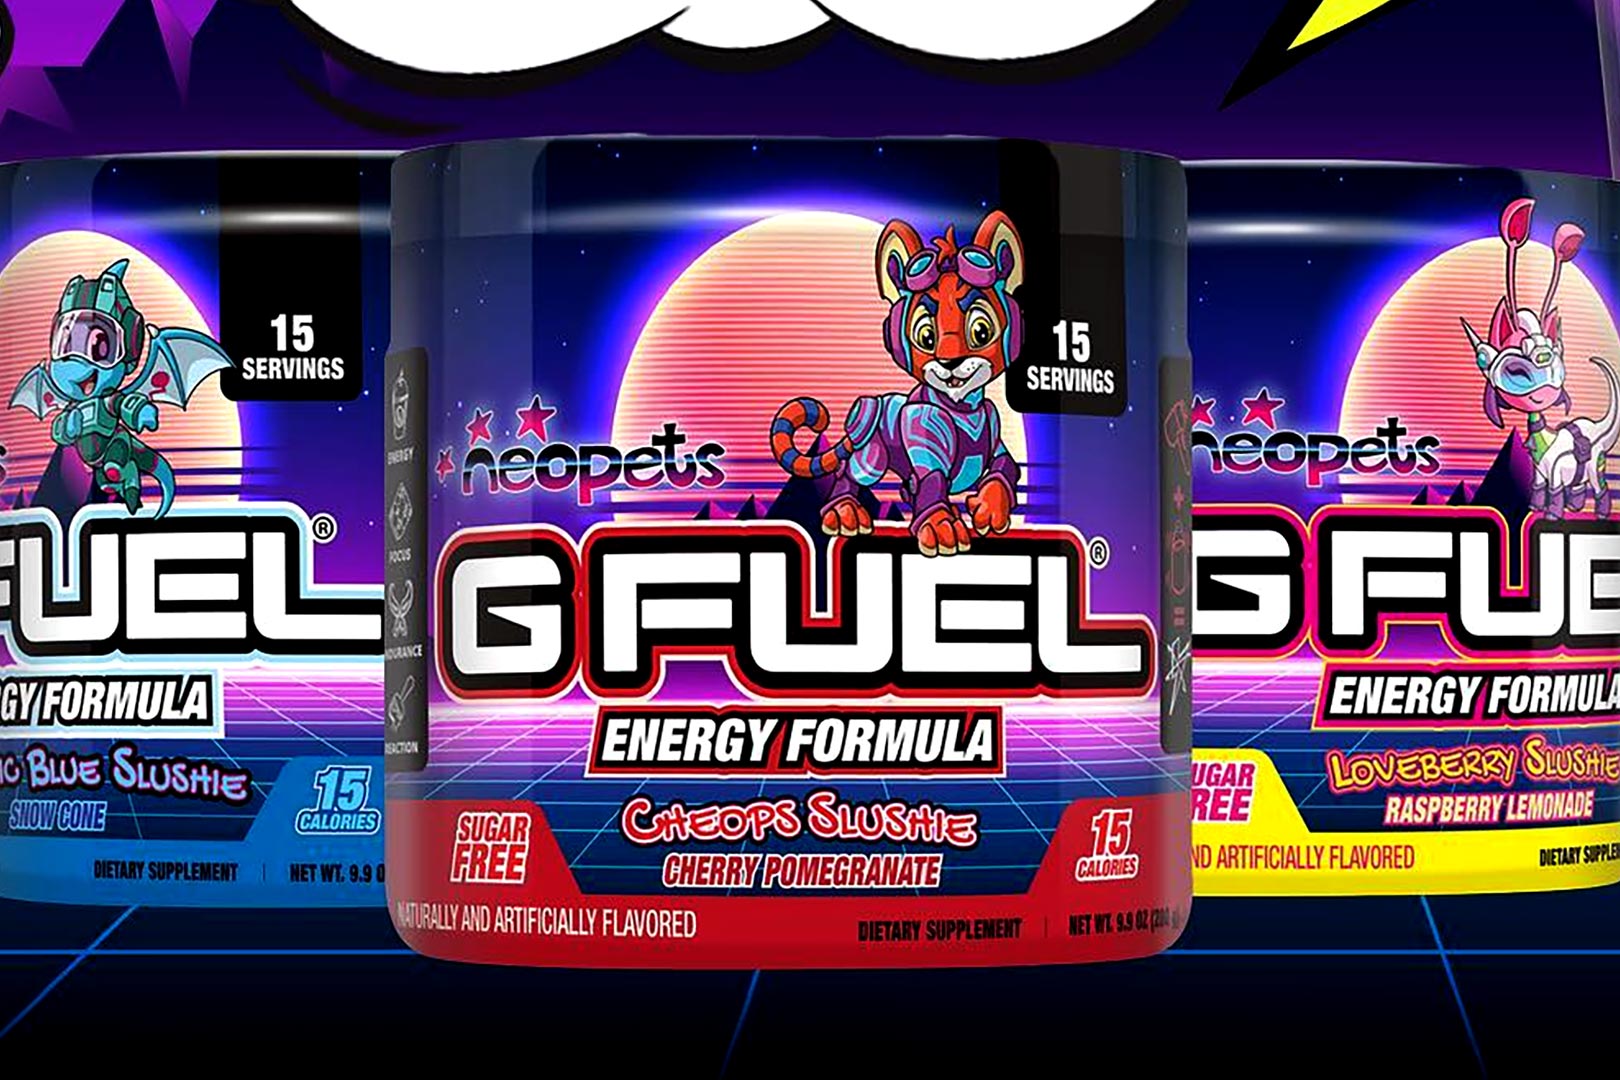 G Fuel X Neopets Collaboration